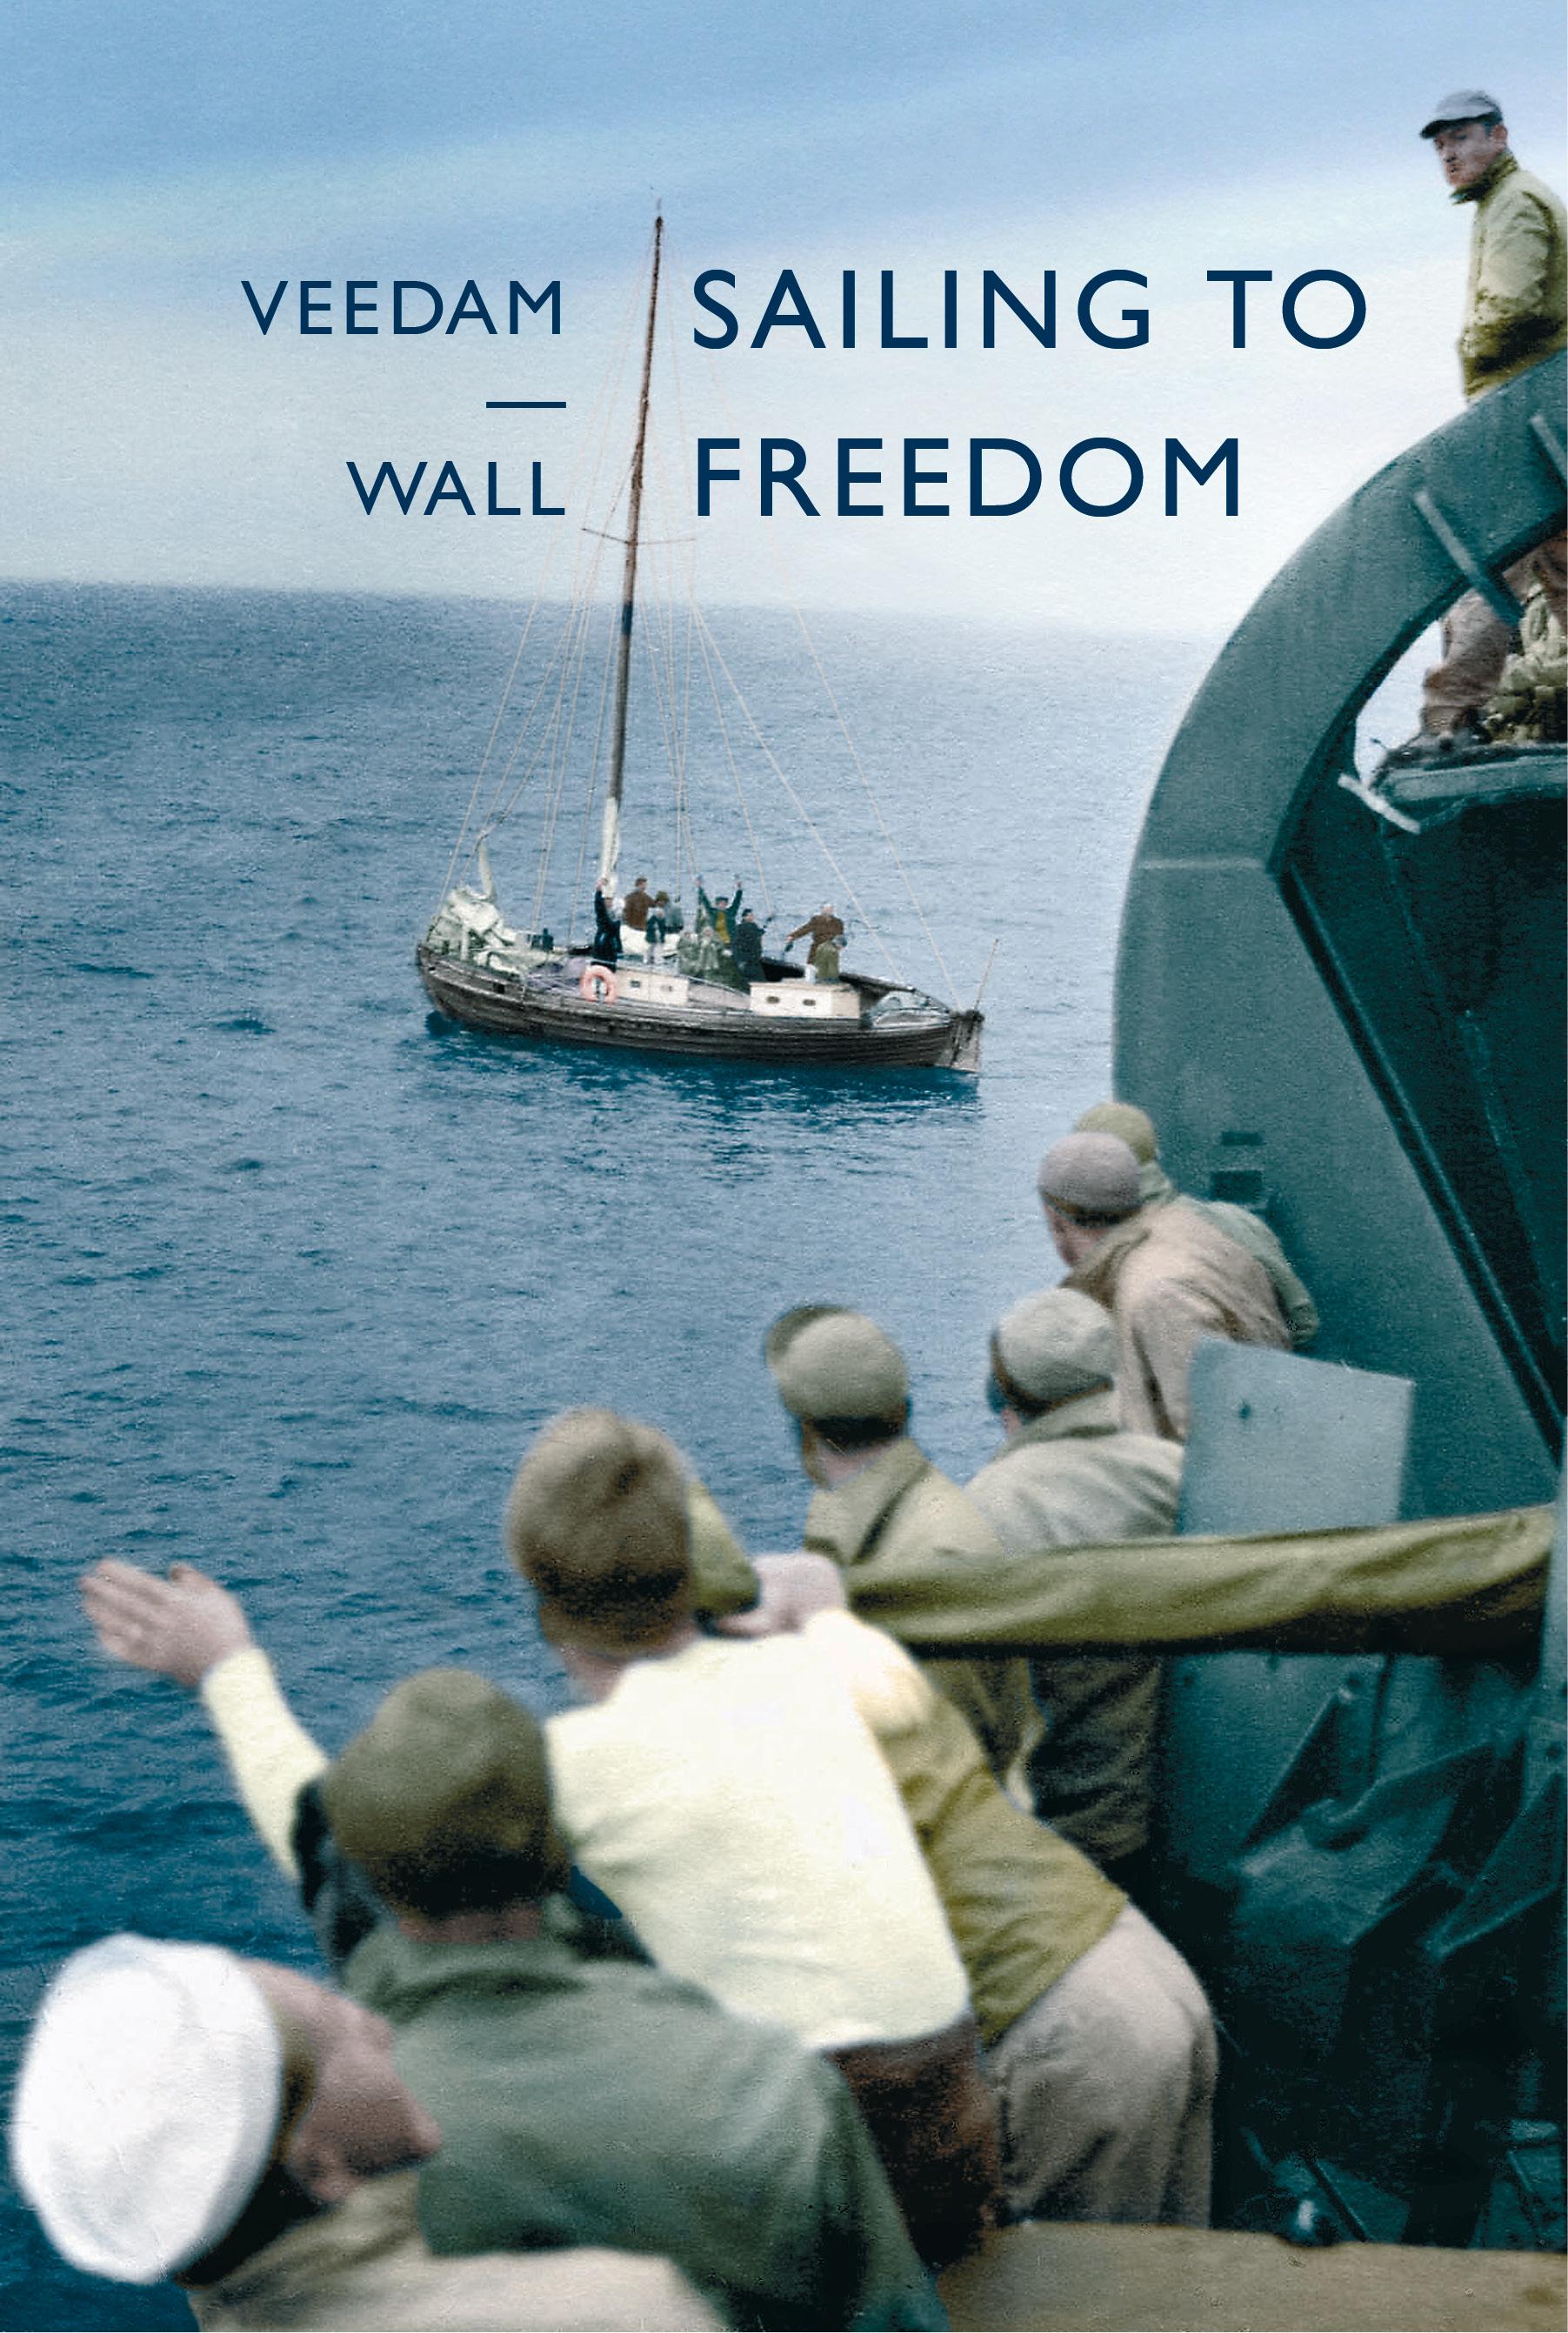 Sailing to Freedom